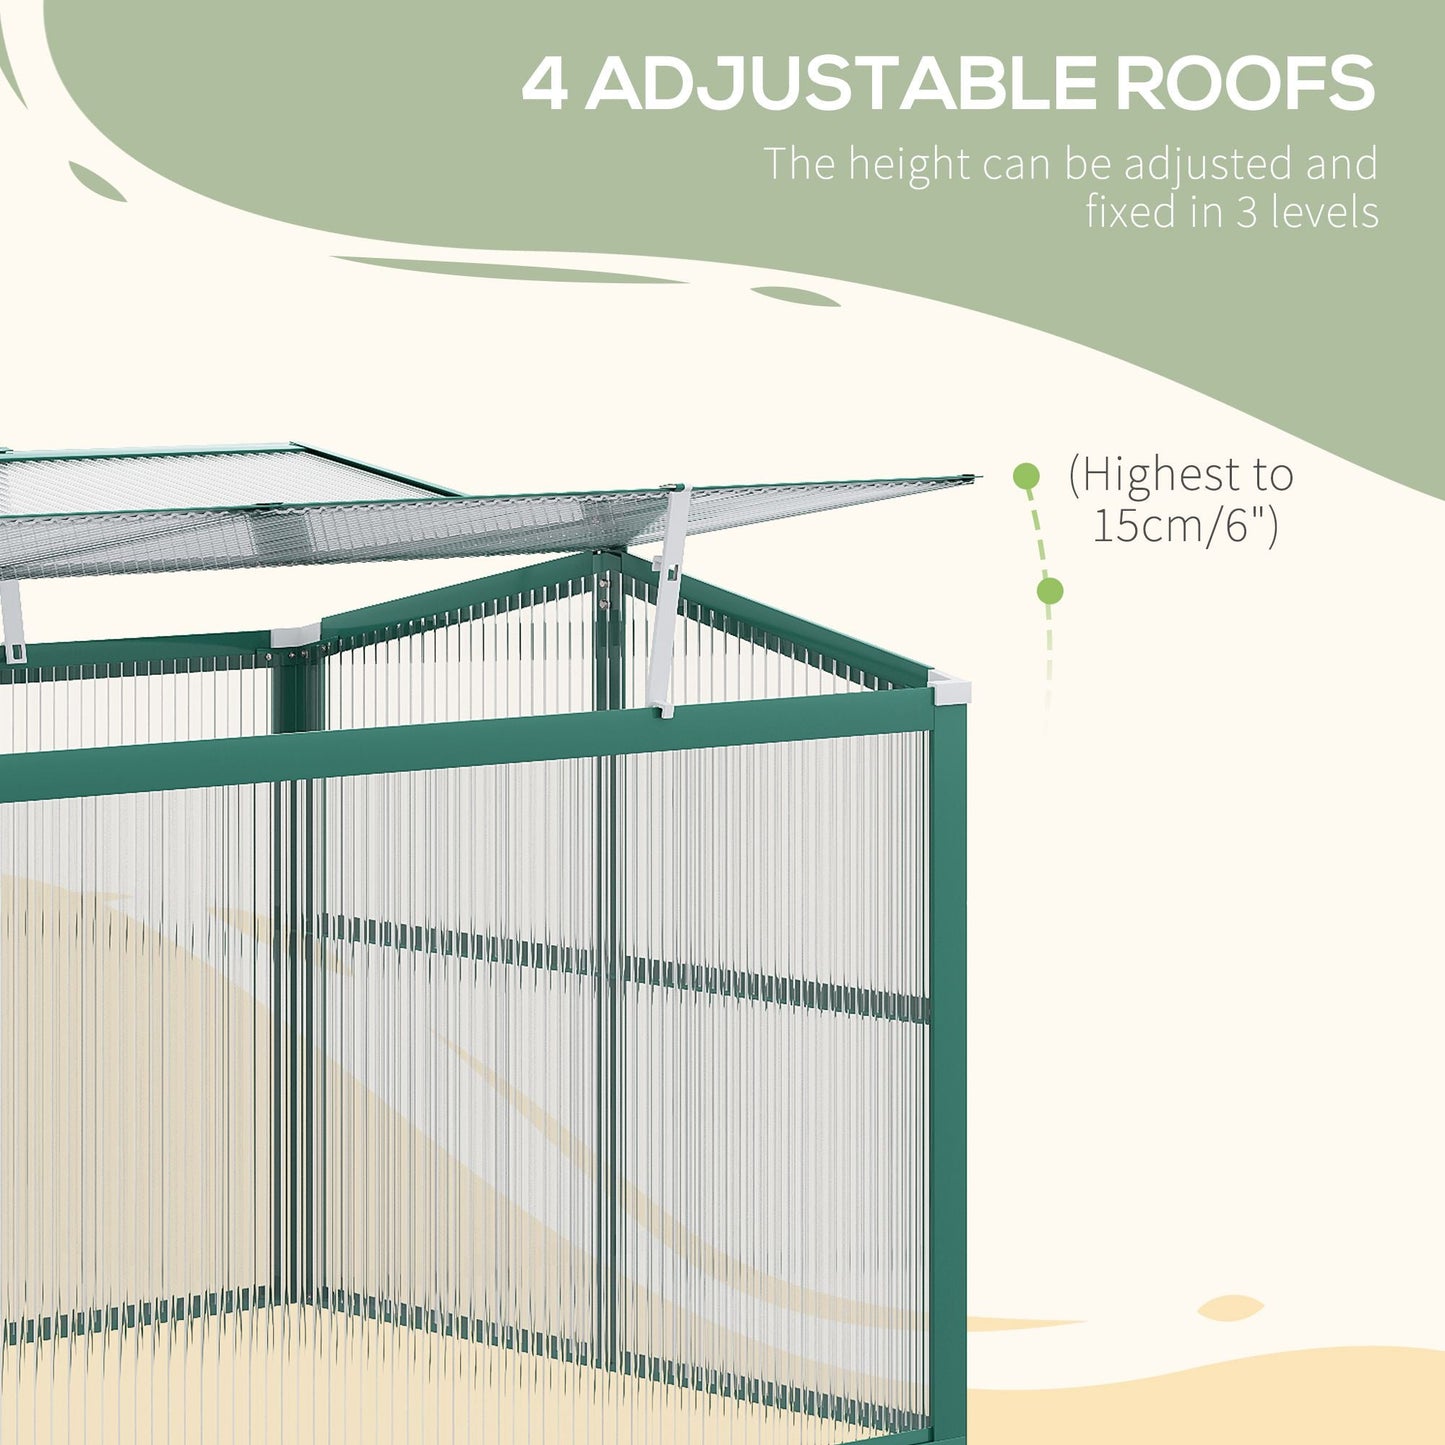 Aluminium Cold Frame Greenhouse Garden Portable Raised Planter with Openable Top, 51" x 28" x 24" at Gallery Canada